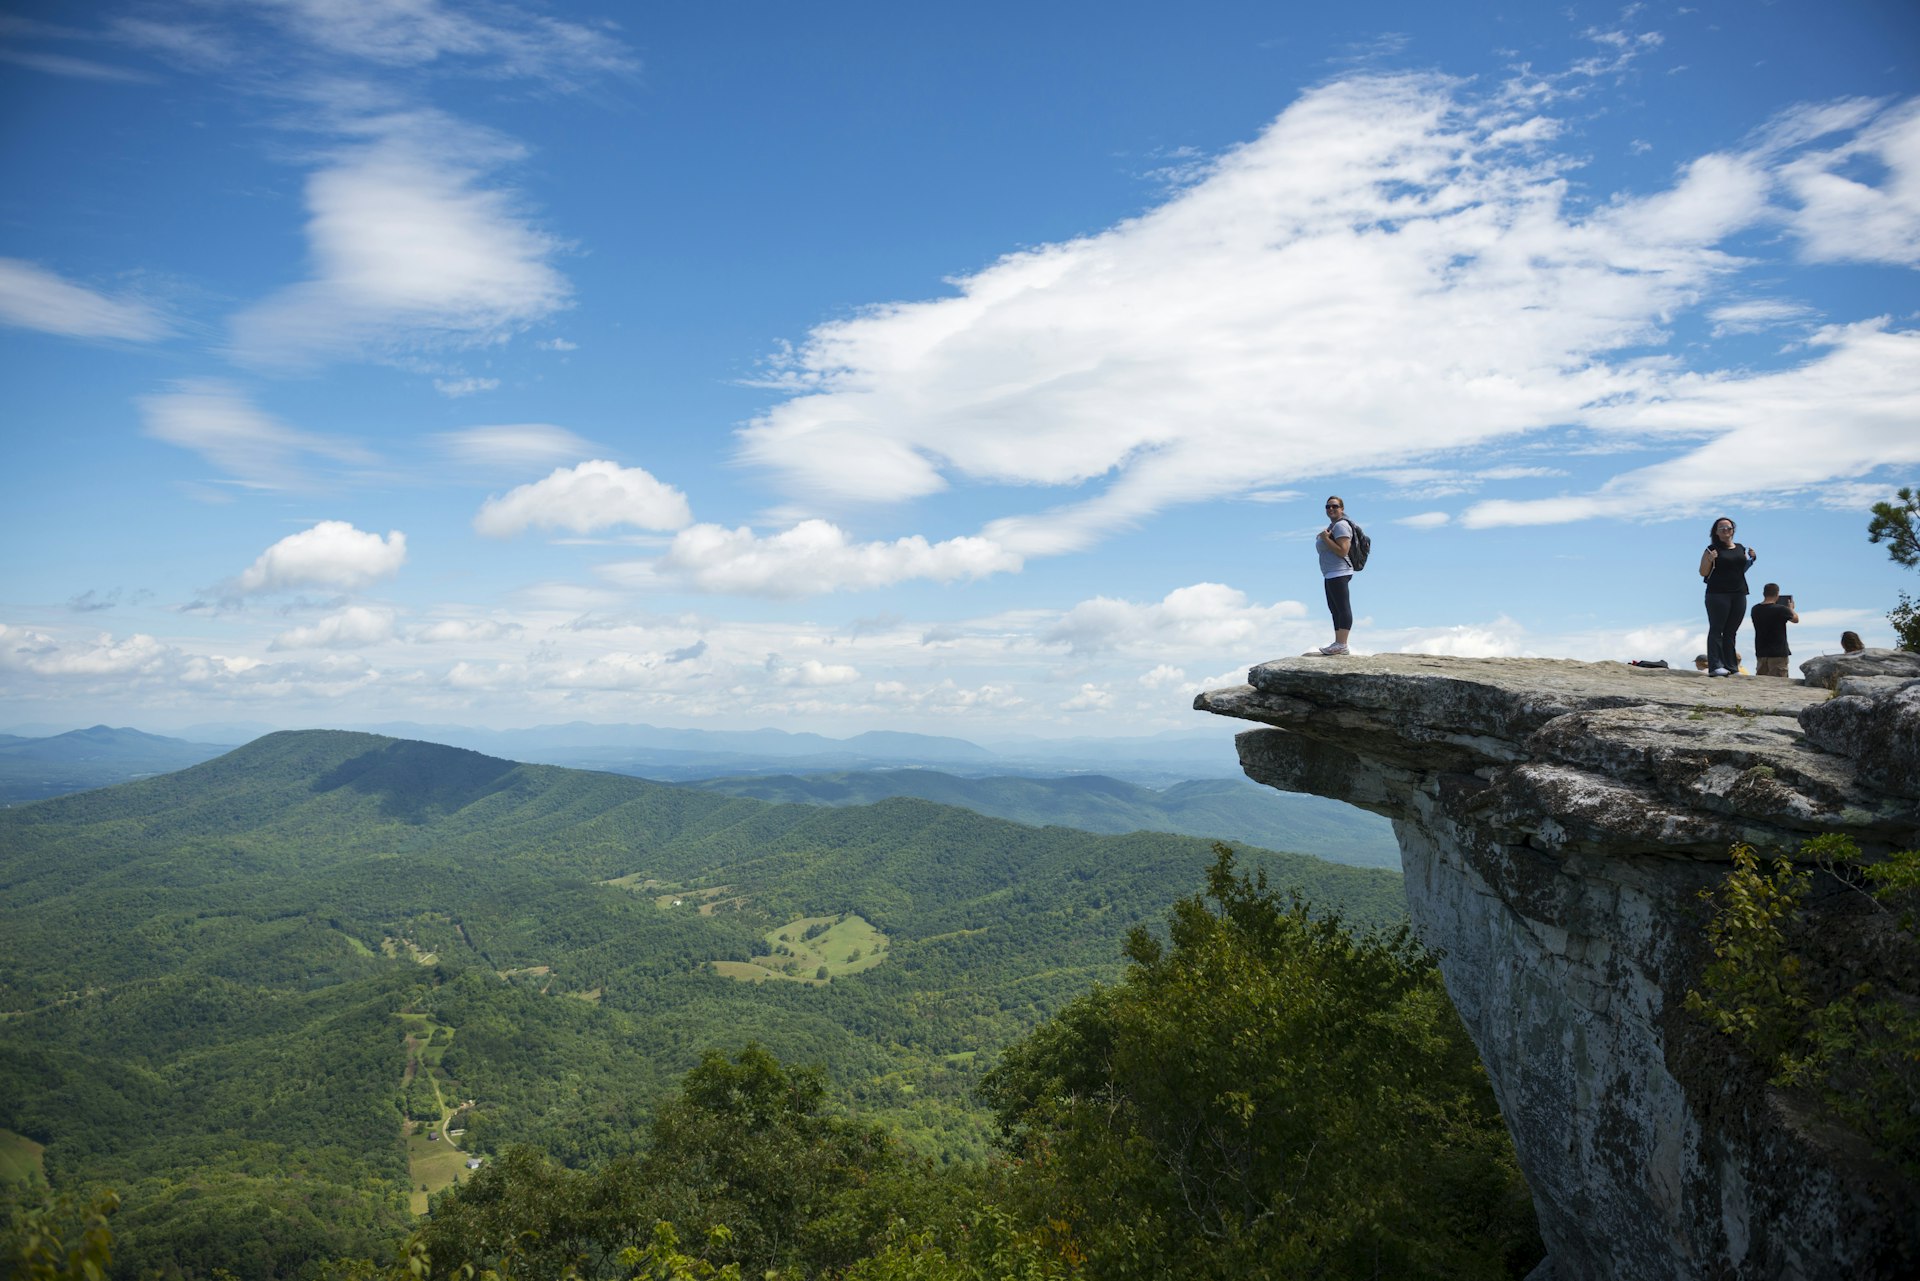 Hikers at McAfee Knob on Appalachian Trail in Virginia